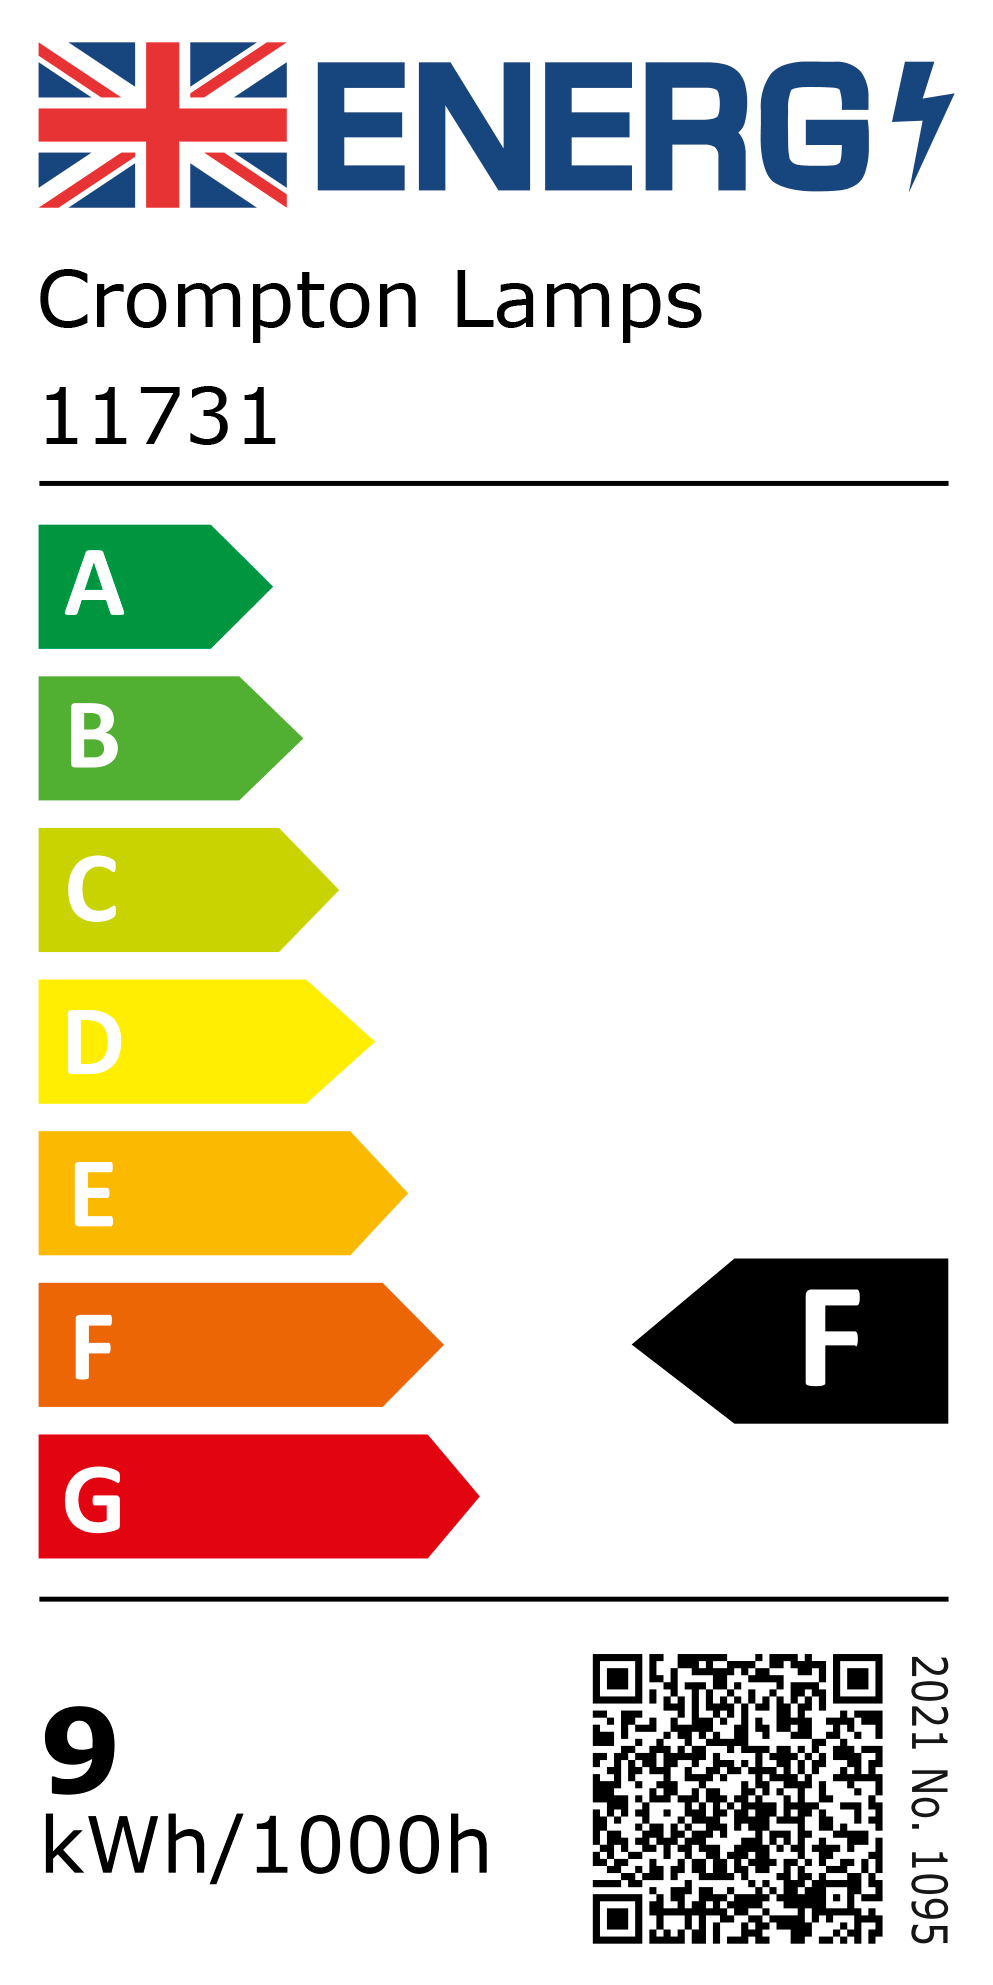 New 2021 Energy Rating Label: Stock Code 11731